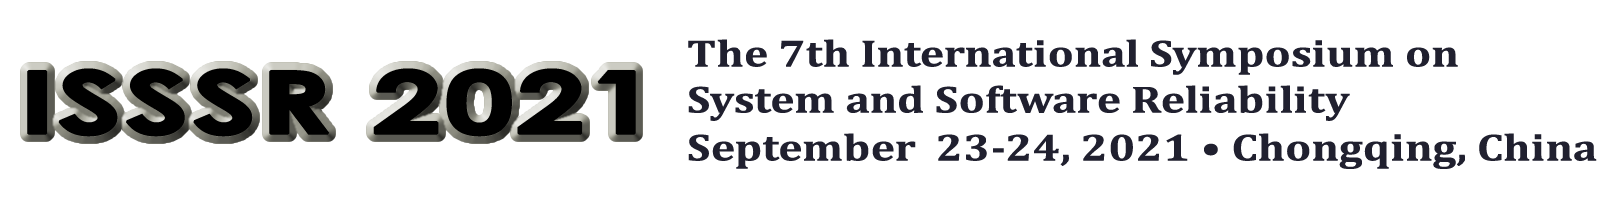 ISSSR 2021 September 23-24, 2021 in Chongqing, China. The 7th International Symposium on System and Software Reliability.